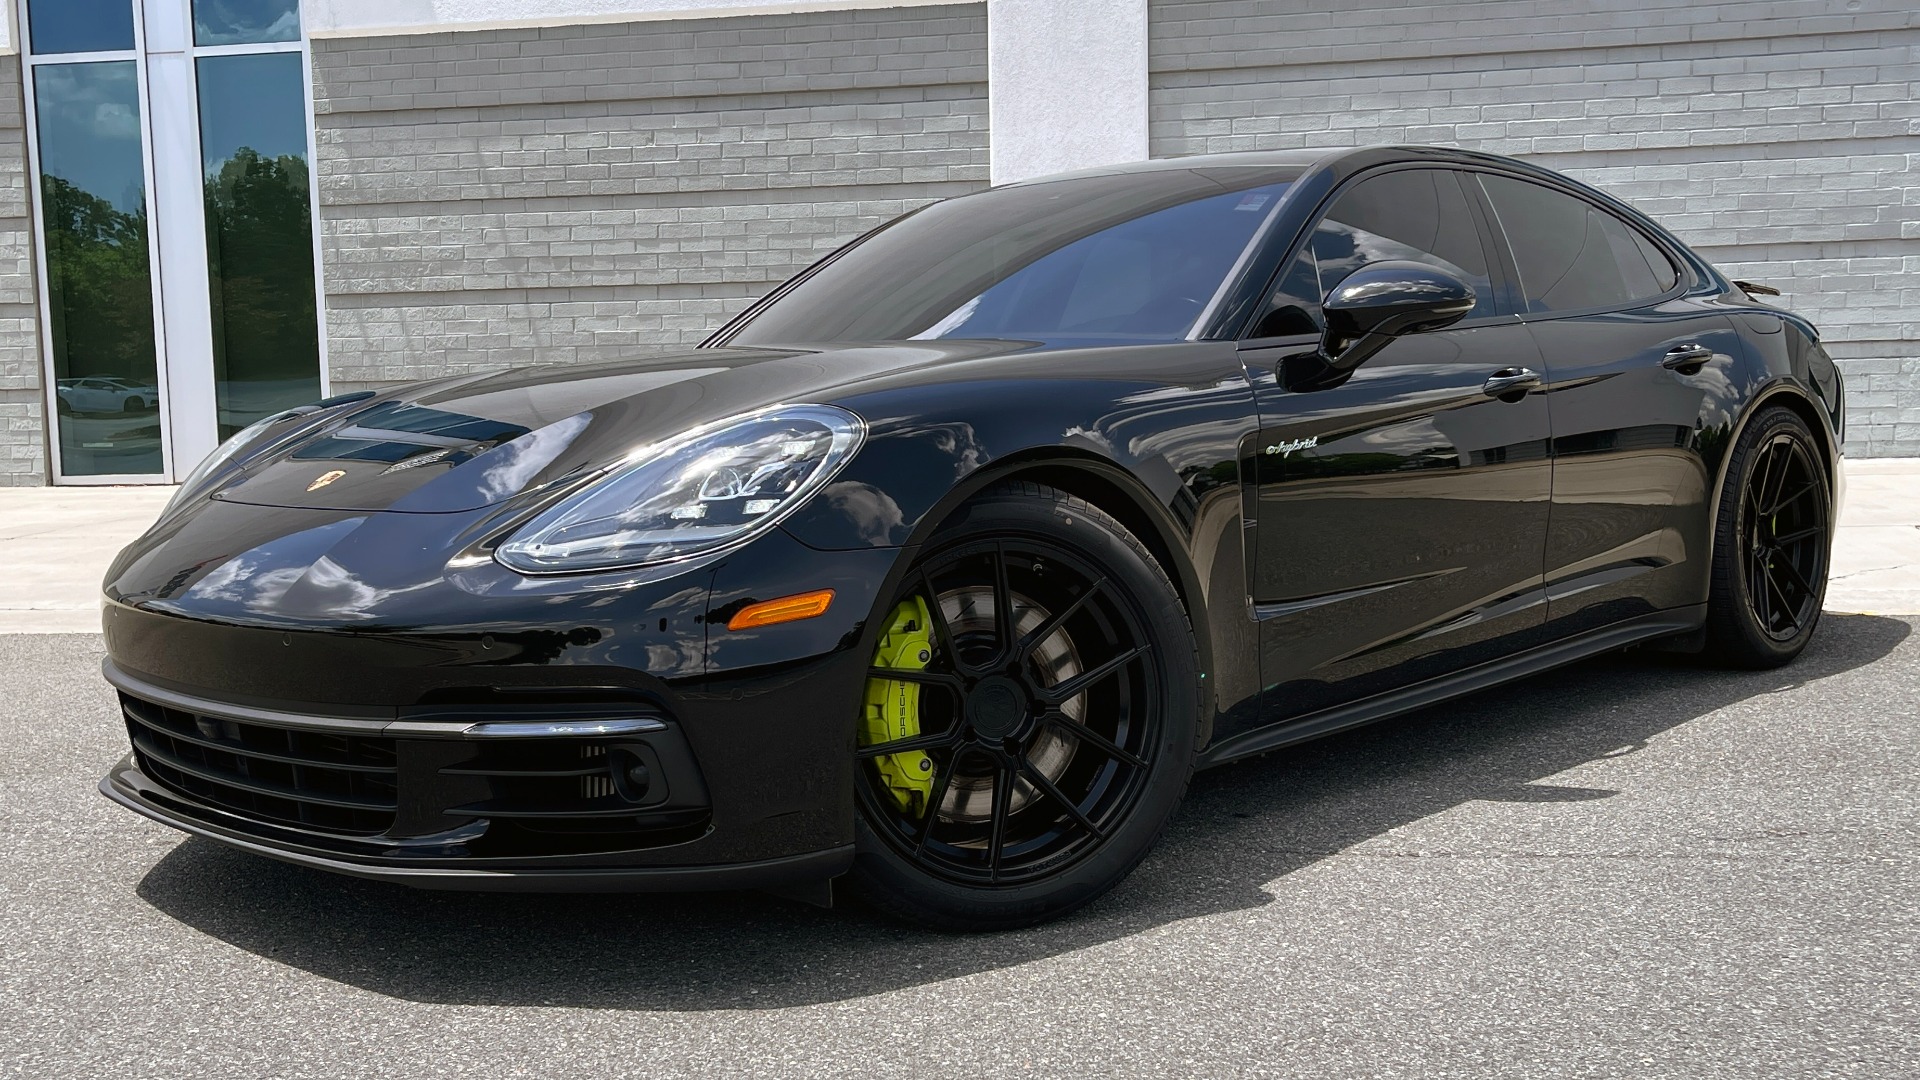 Used 2018 Porsche PANAMERA 4 E-HYBRID / AWD / NAV / SUNROOF / BOSE / REARVIEW for sale Sold at Formula Imports in Charlotte NC 28227 1